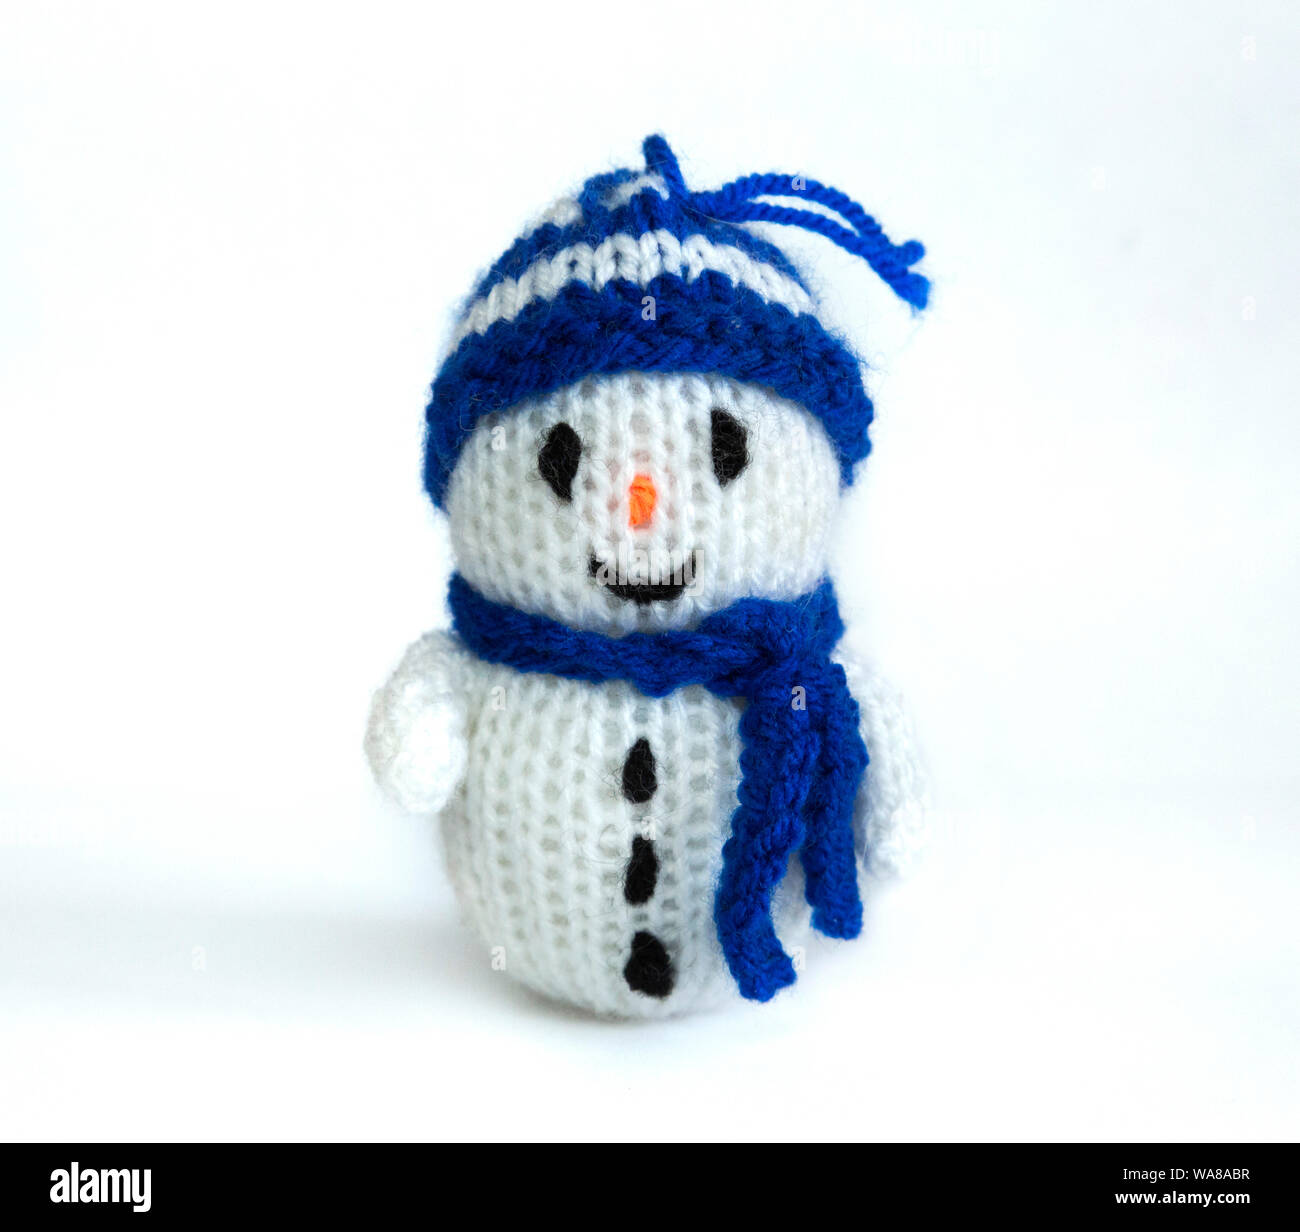 knitted wool snowman gift Stock Photo